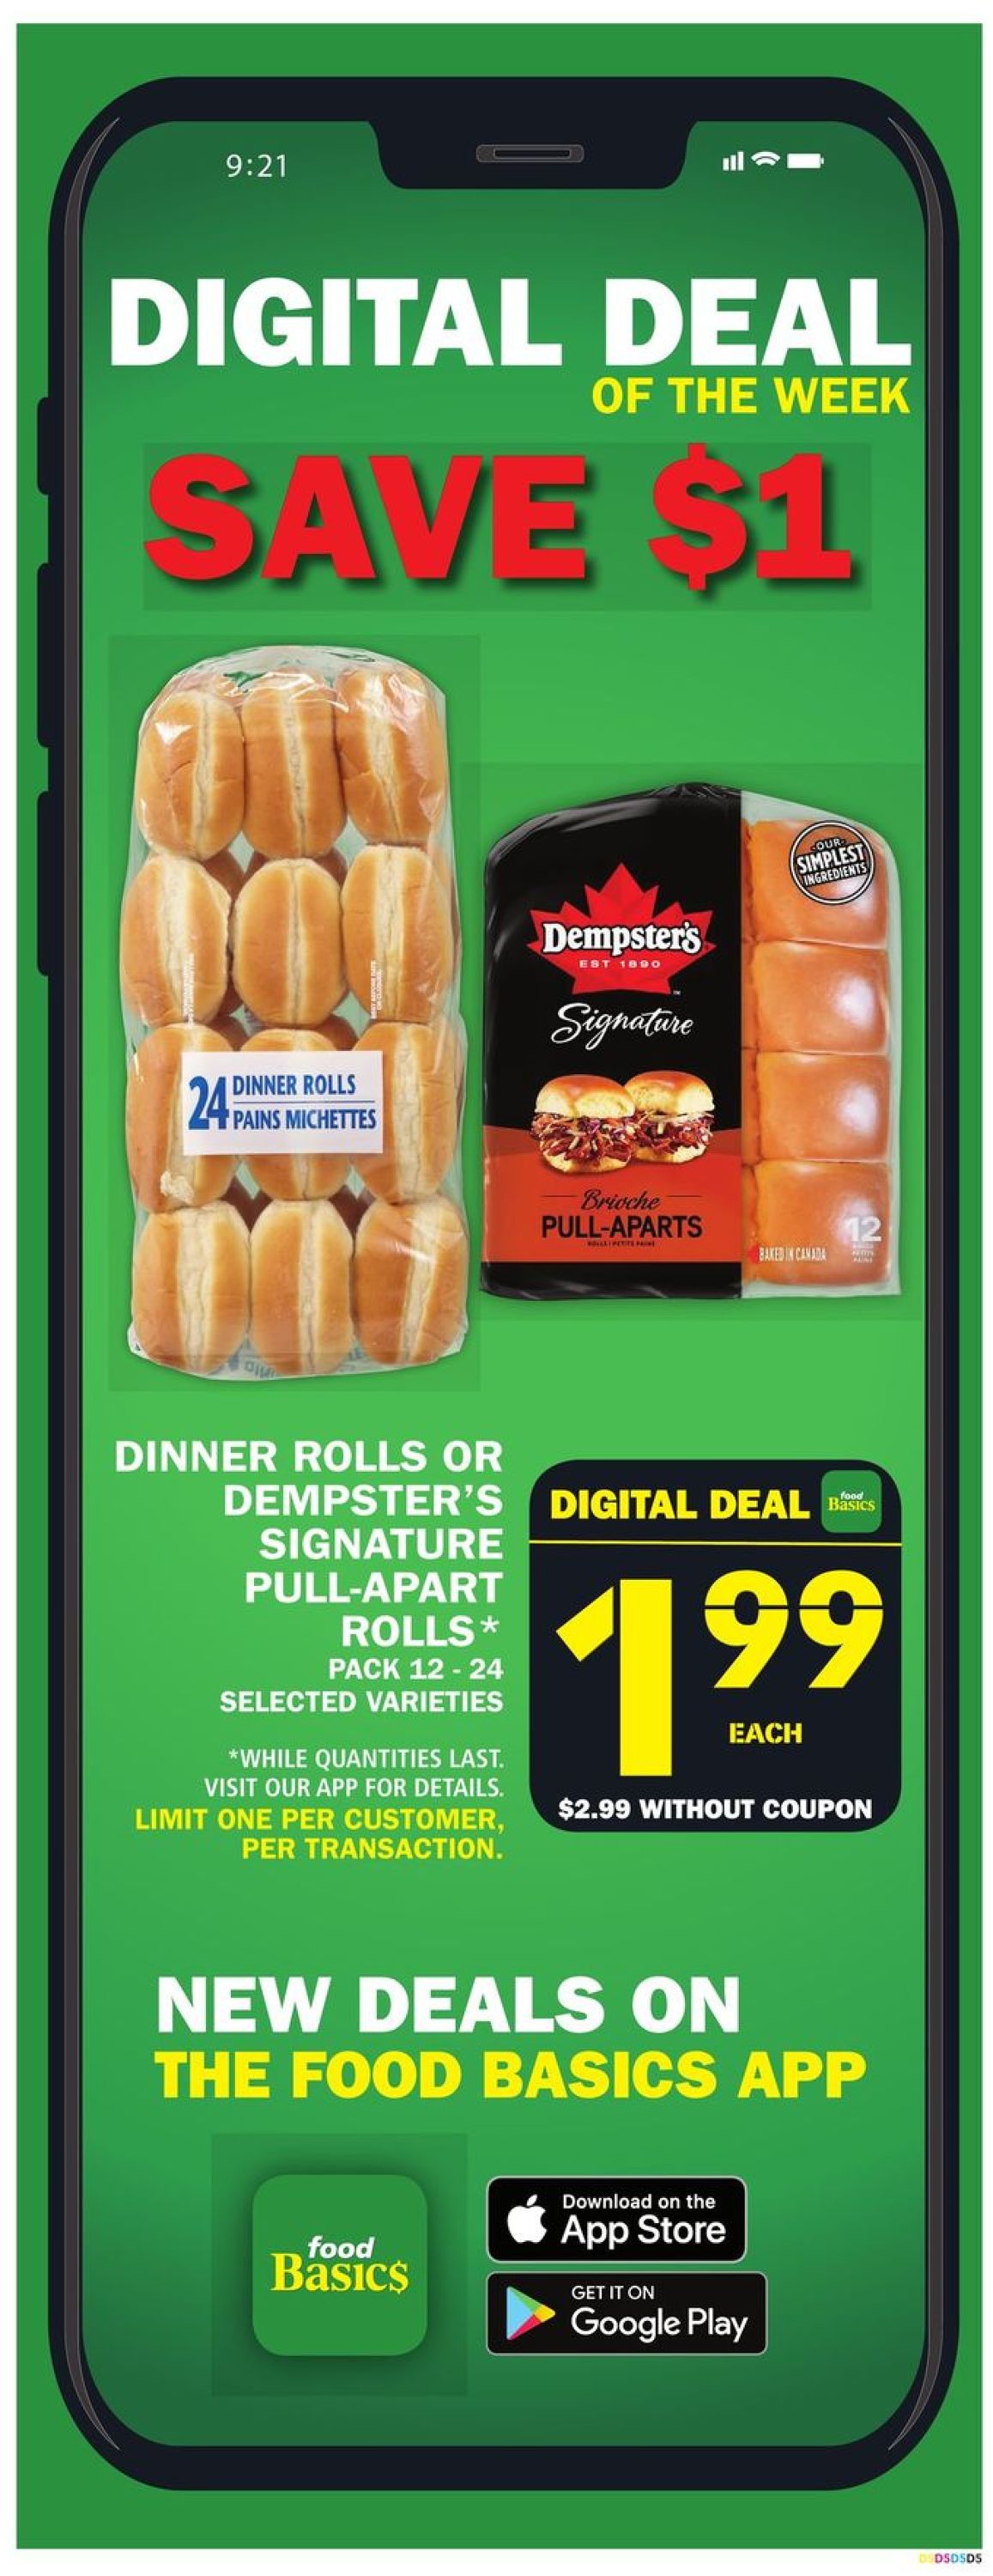 Food Basics Flyer from 04/14/2022